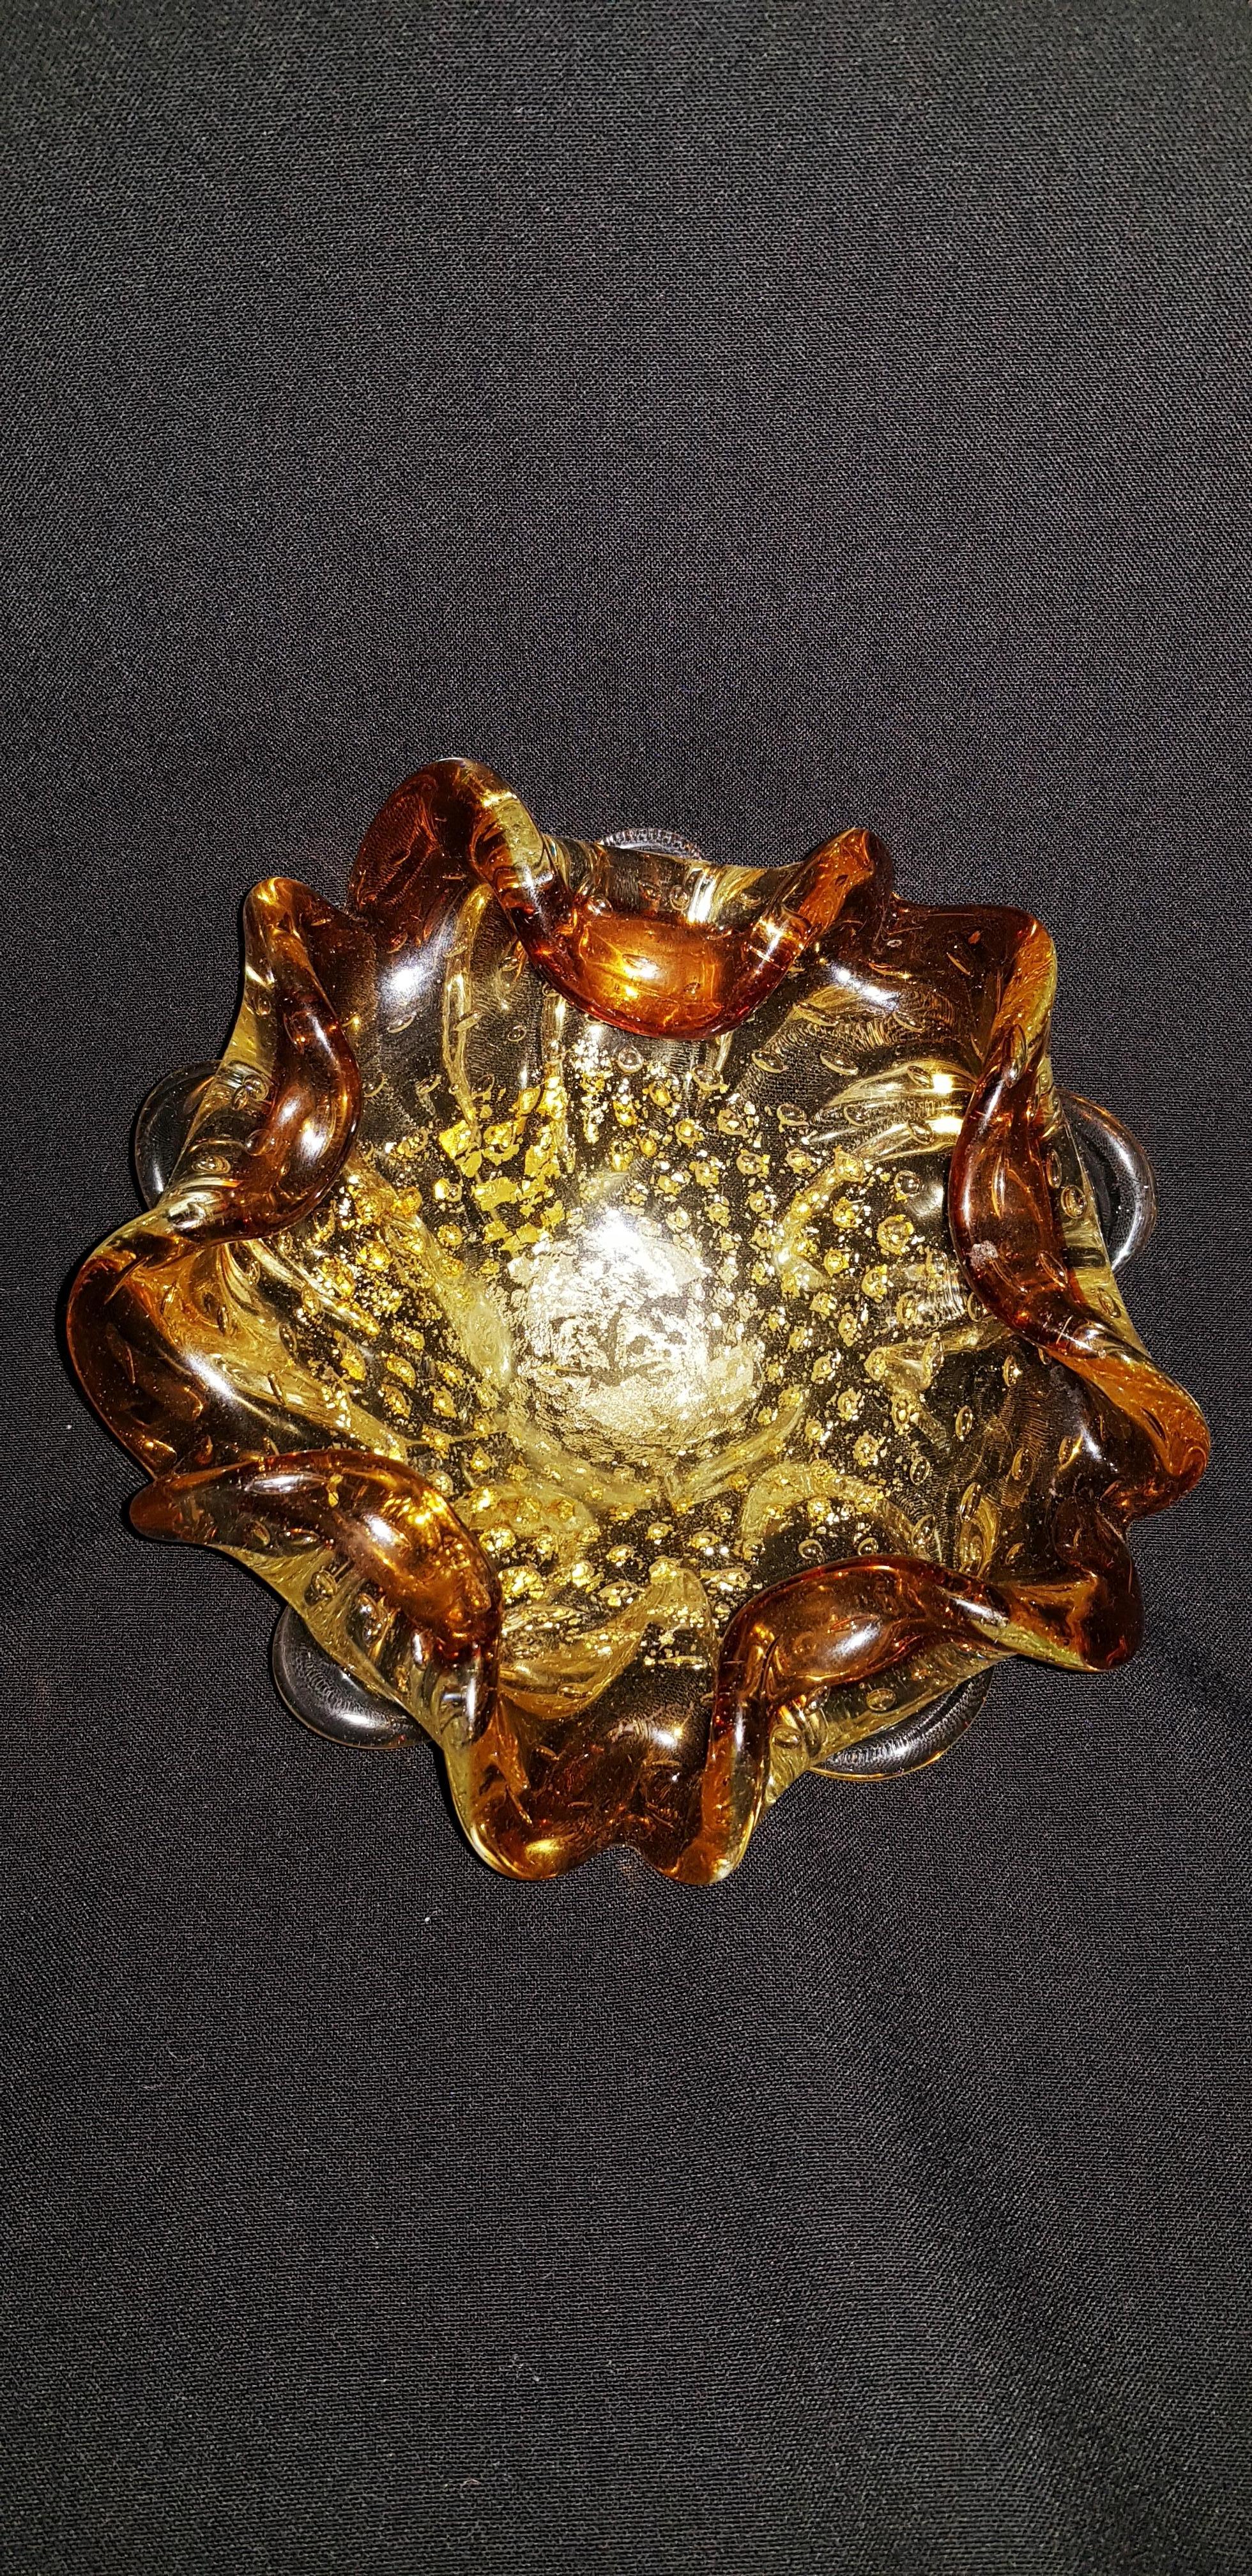 Beautiful middle of century Murano glass bowl with gold leaf and controlled bubbles, by Fratelli Toso brilliant condition.